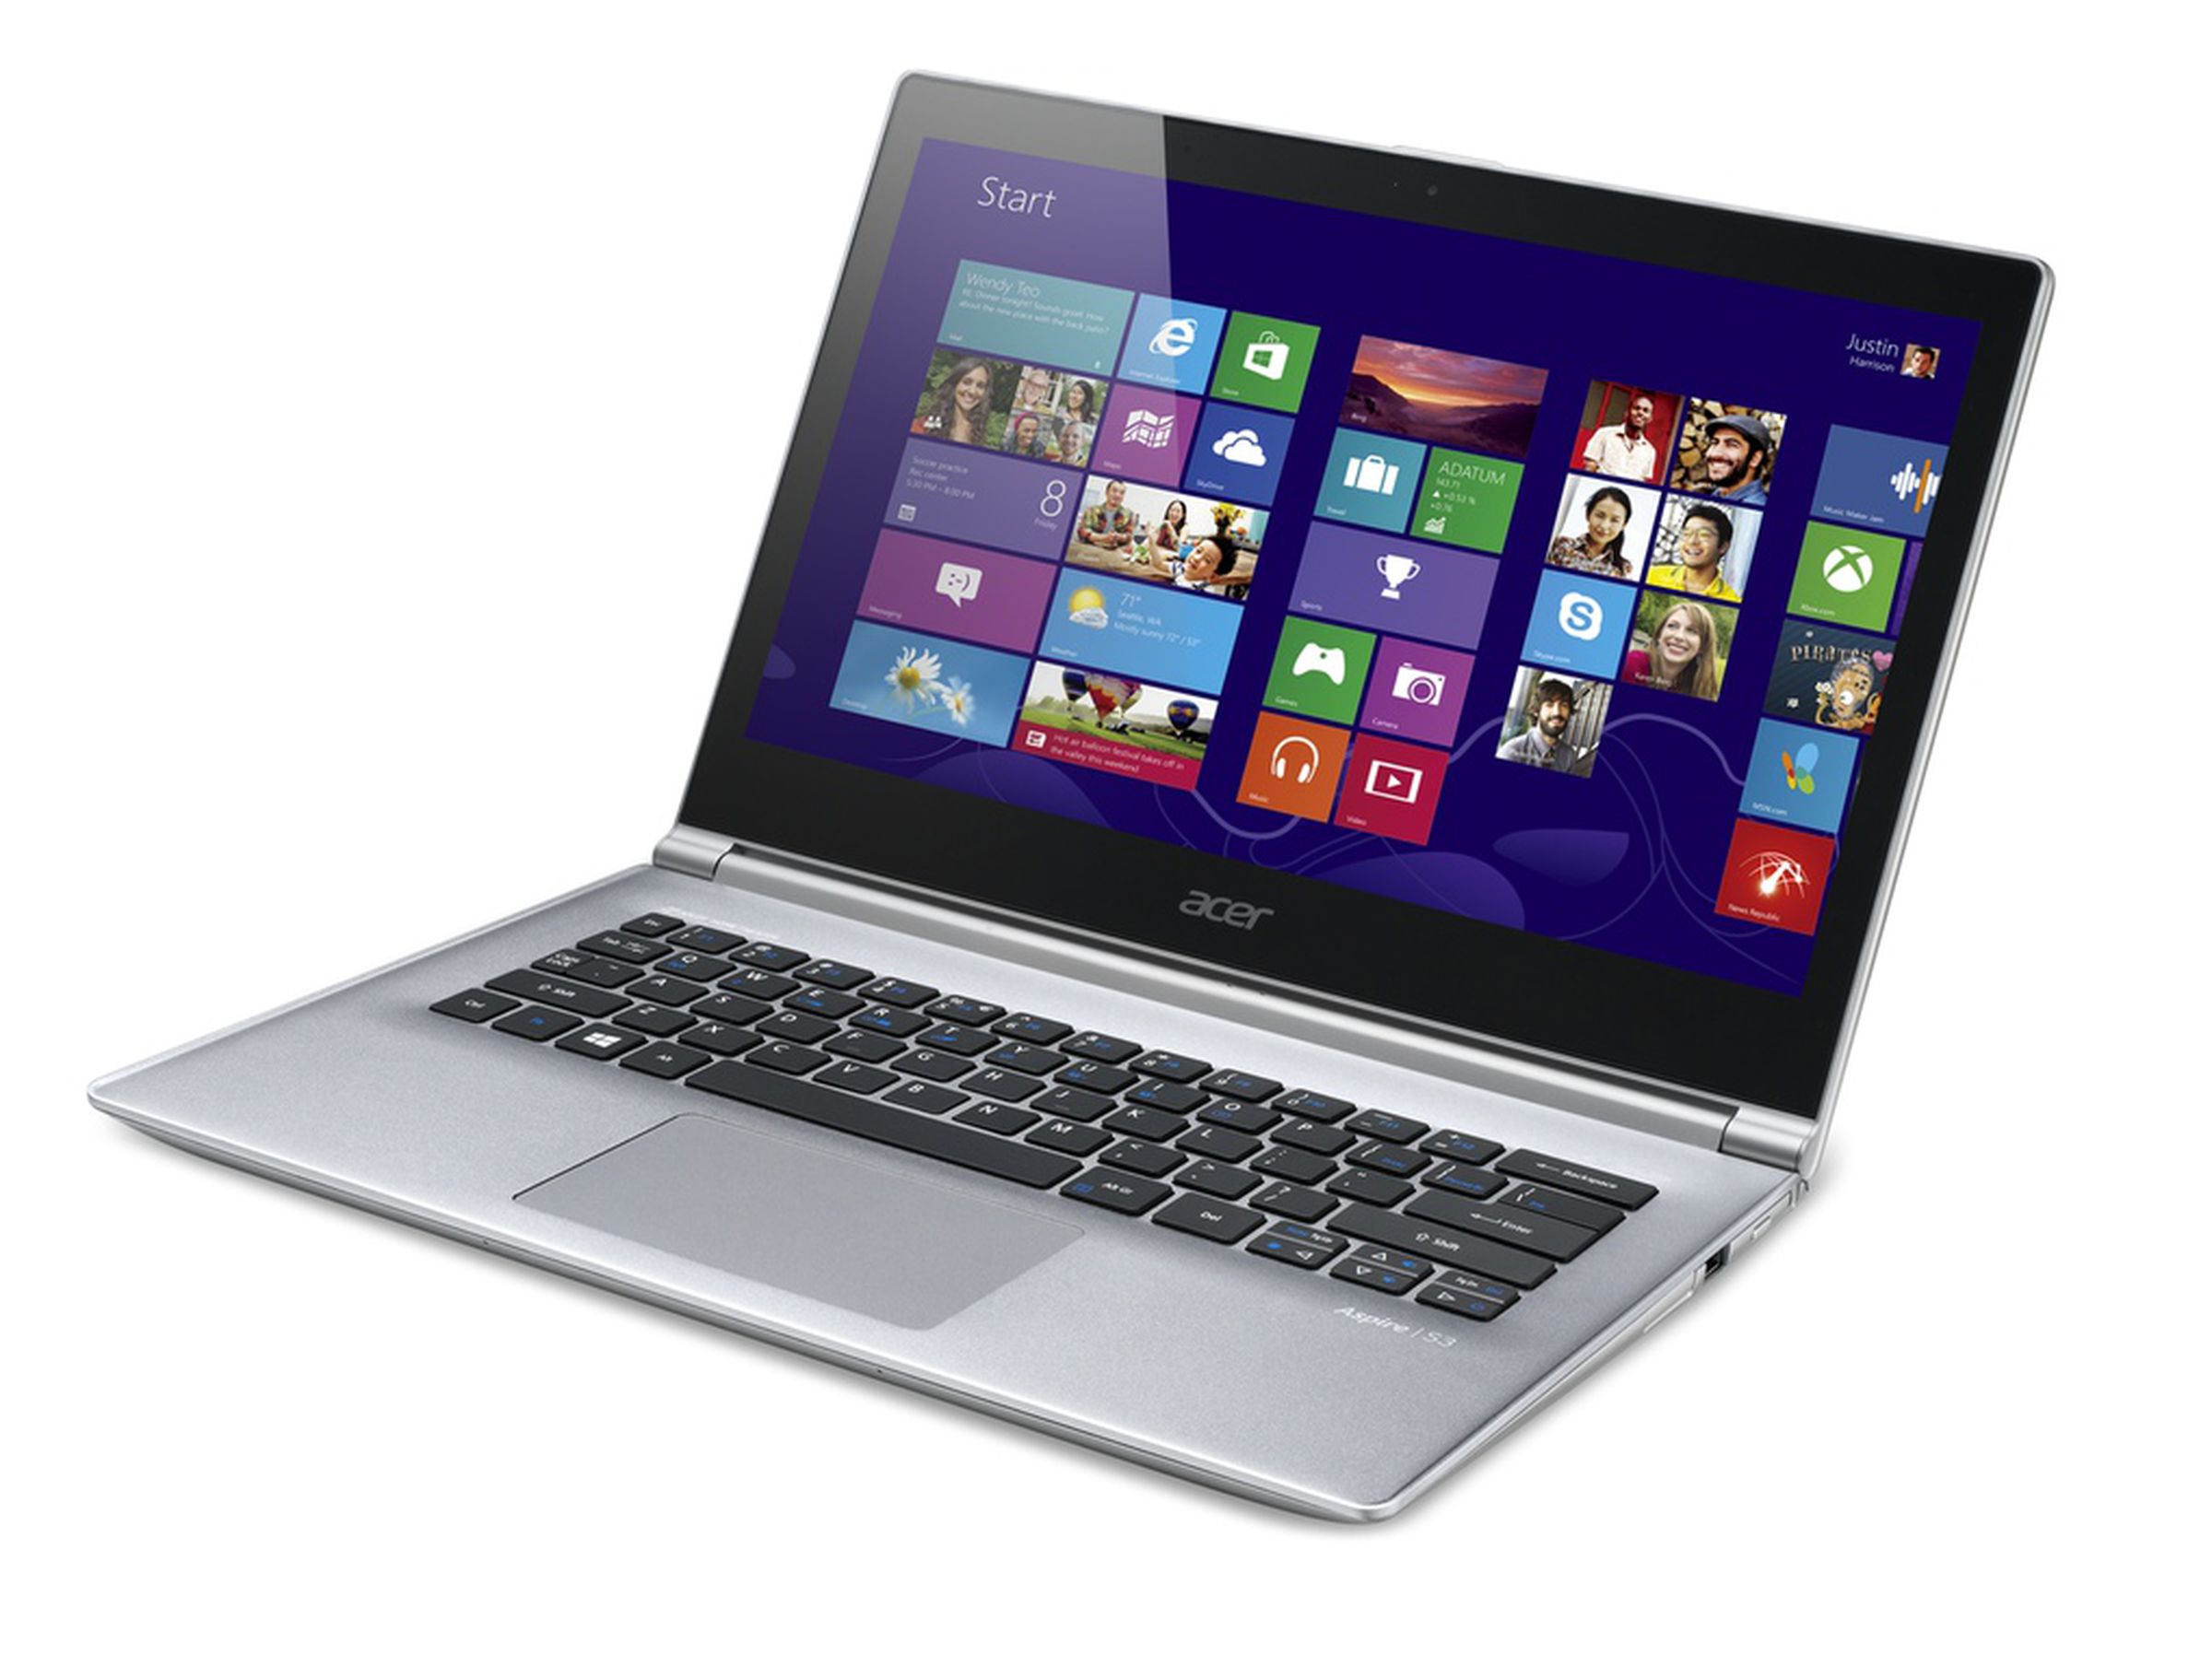 Acer Aspire S7, Aspire S3, and Z3 images